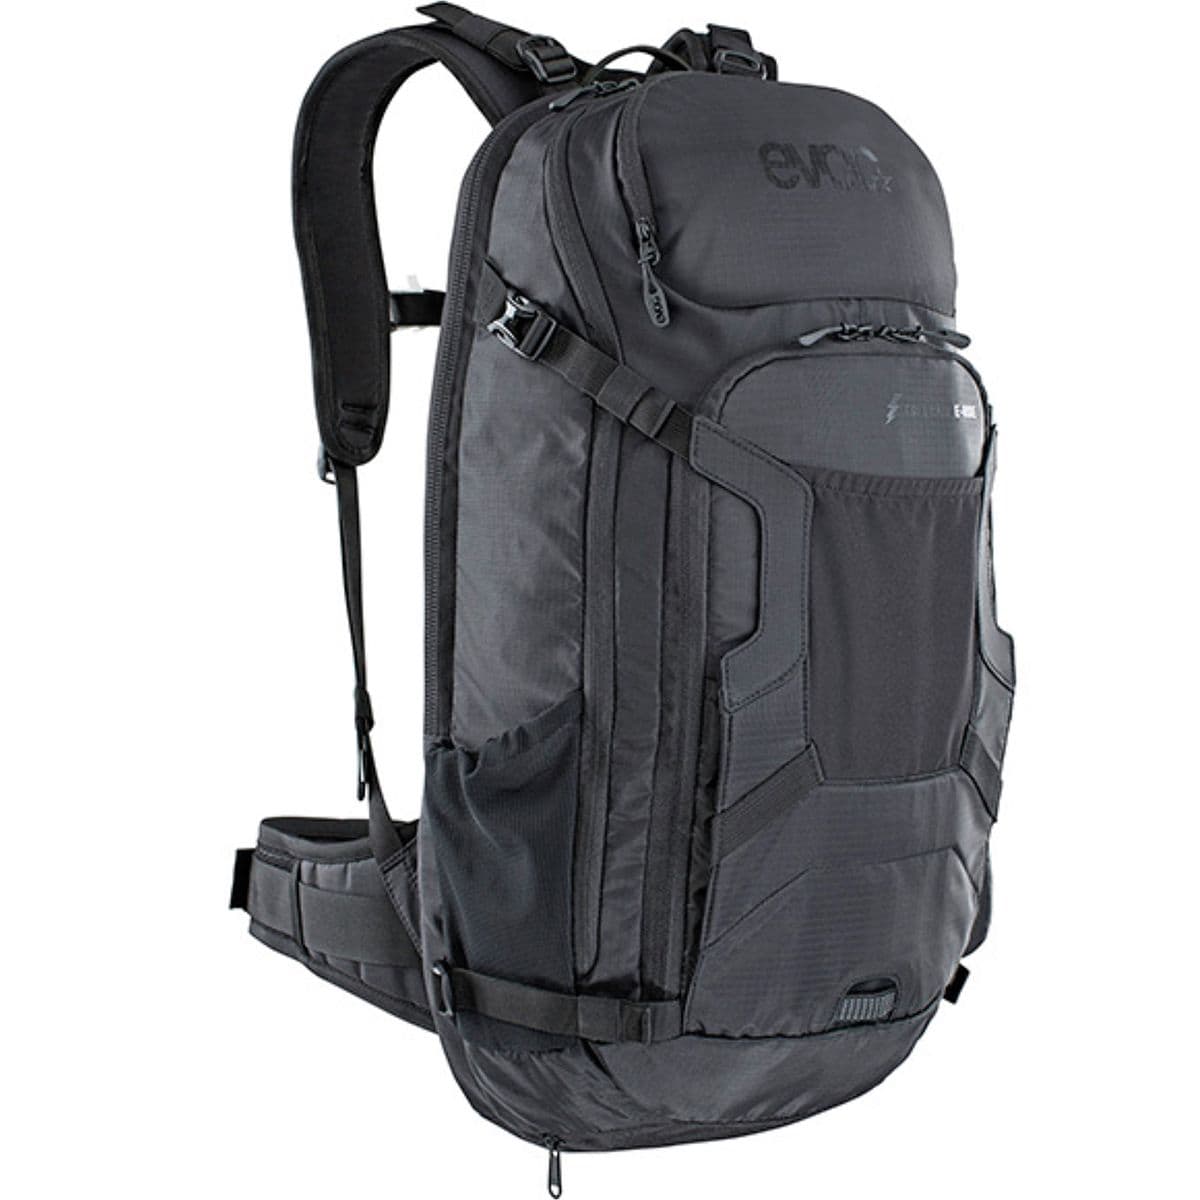 Evoc FR TrailE-Ride Protector 20L Hydration Pack